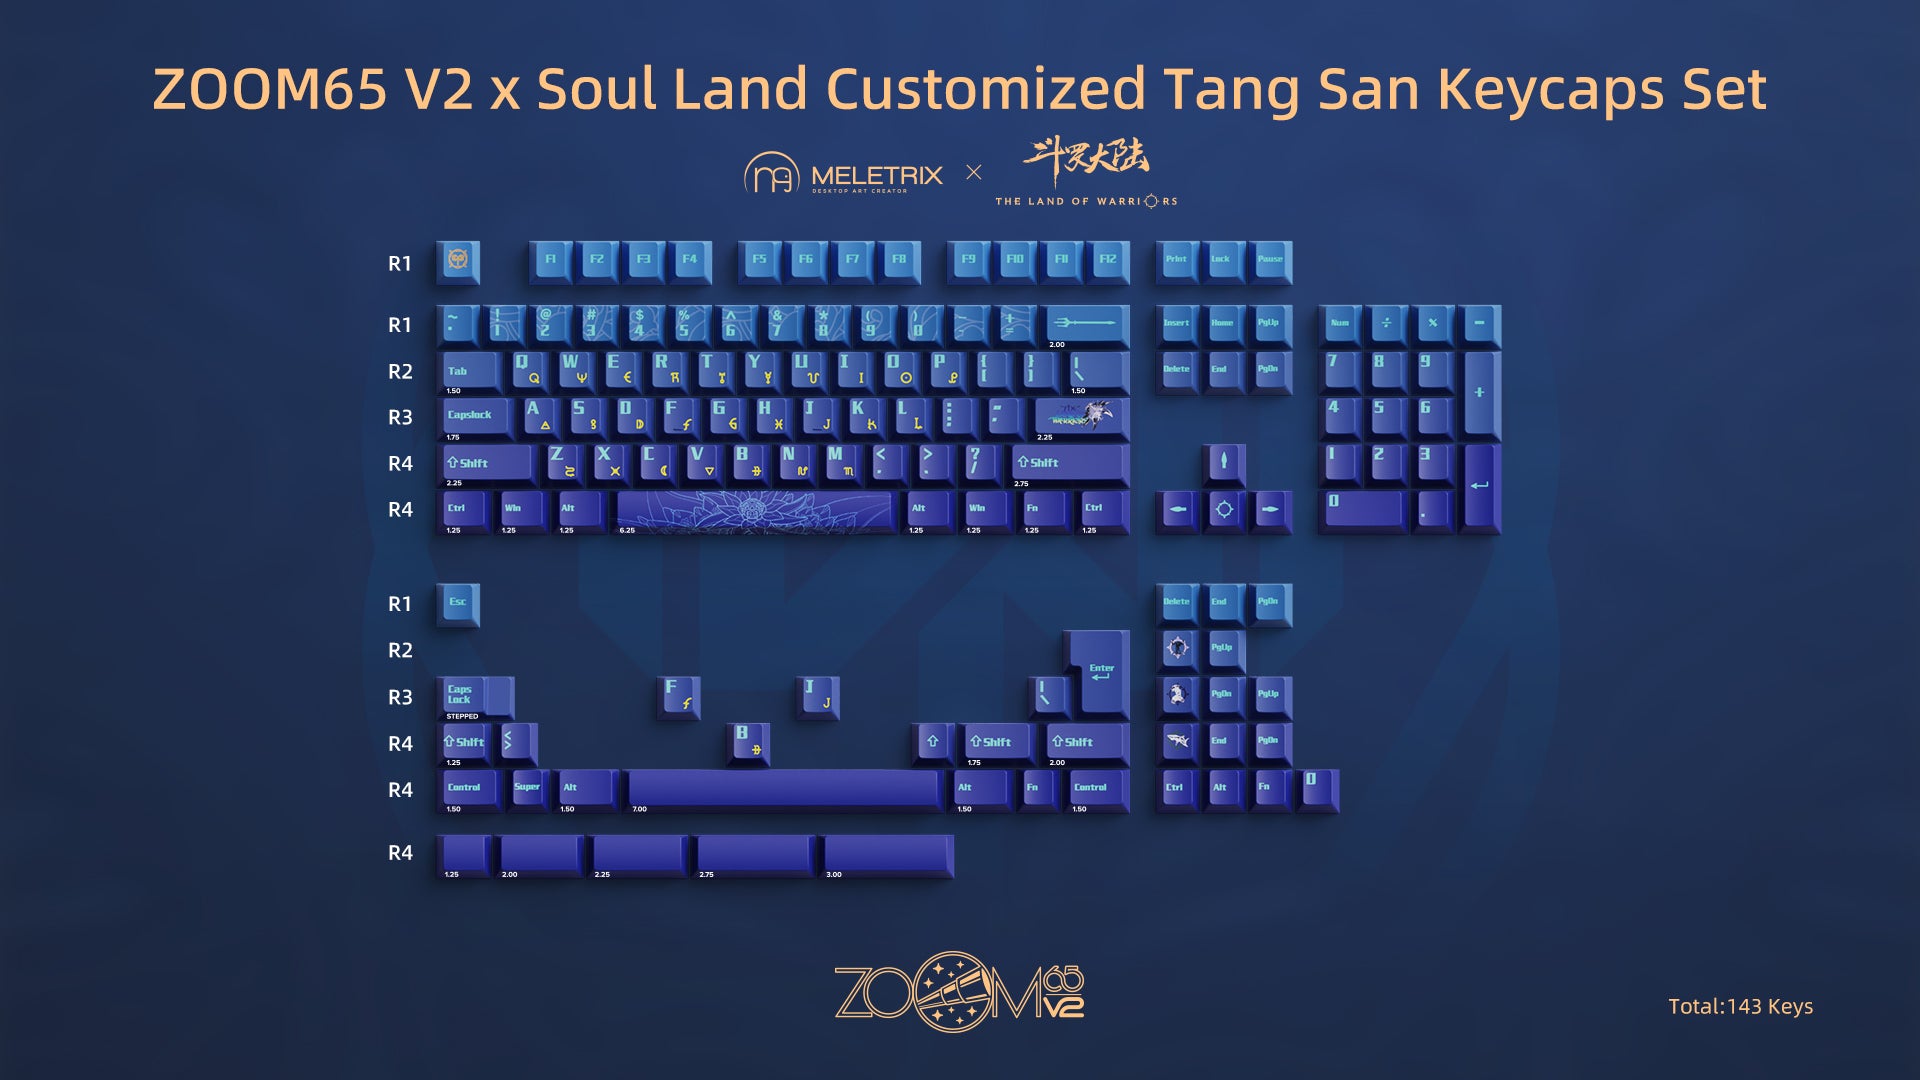 [Group Buy] ZOOM65 V2 x Soul Land Series Add-Ons by Meletrix - KeebsForAll